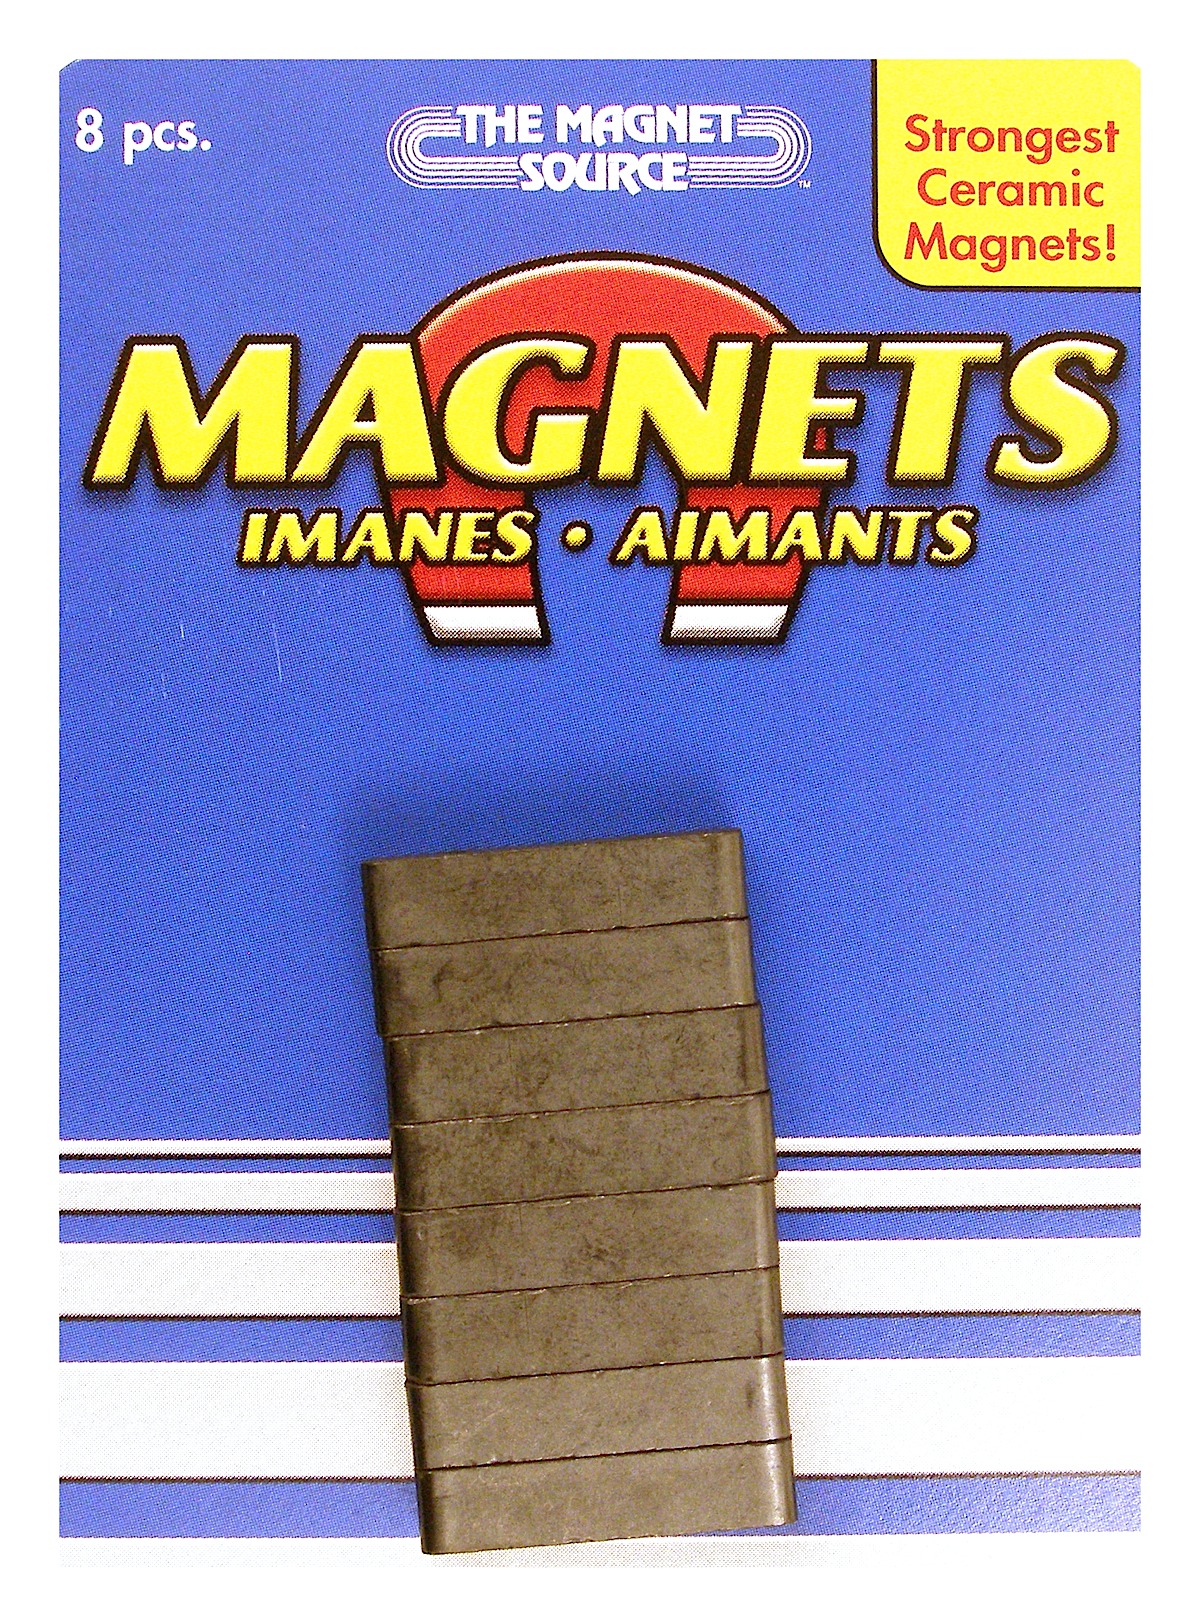 The Magnet Source - Ceramic Magnets